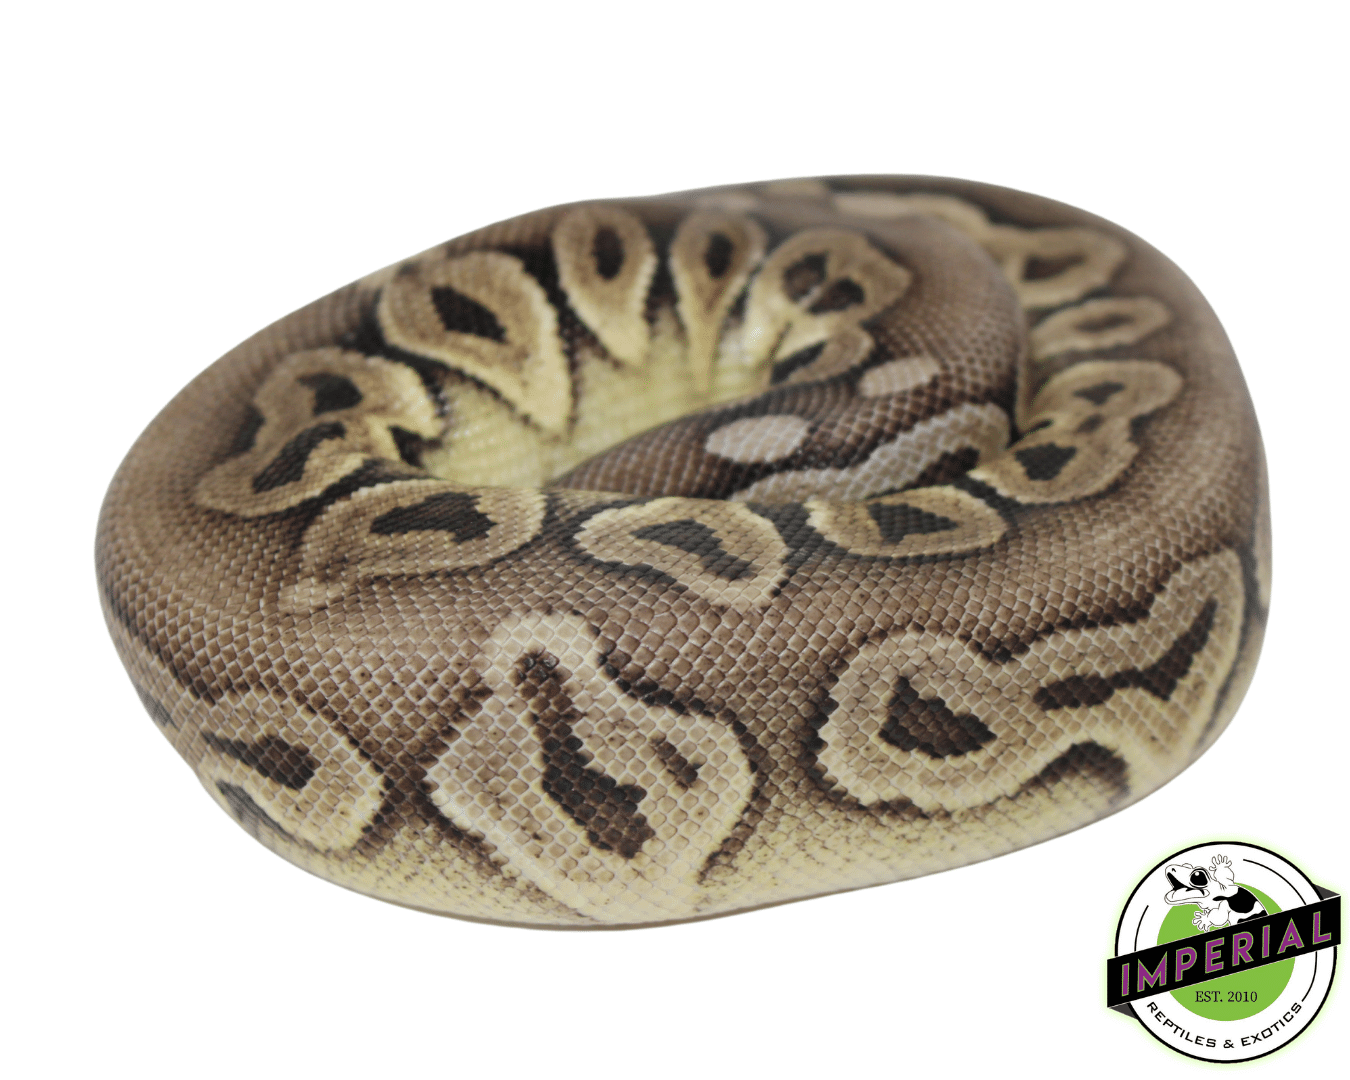 pewter ball python for sale, buy reptiles online